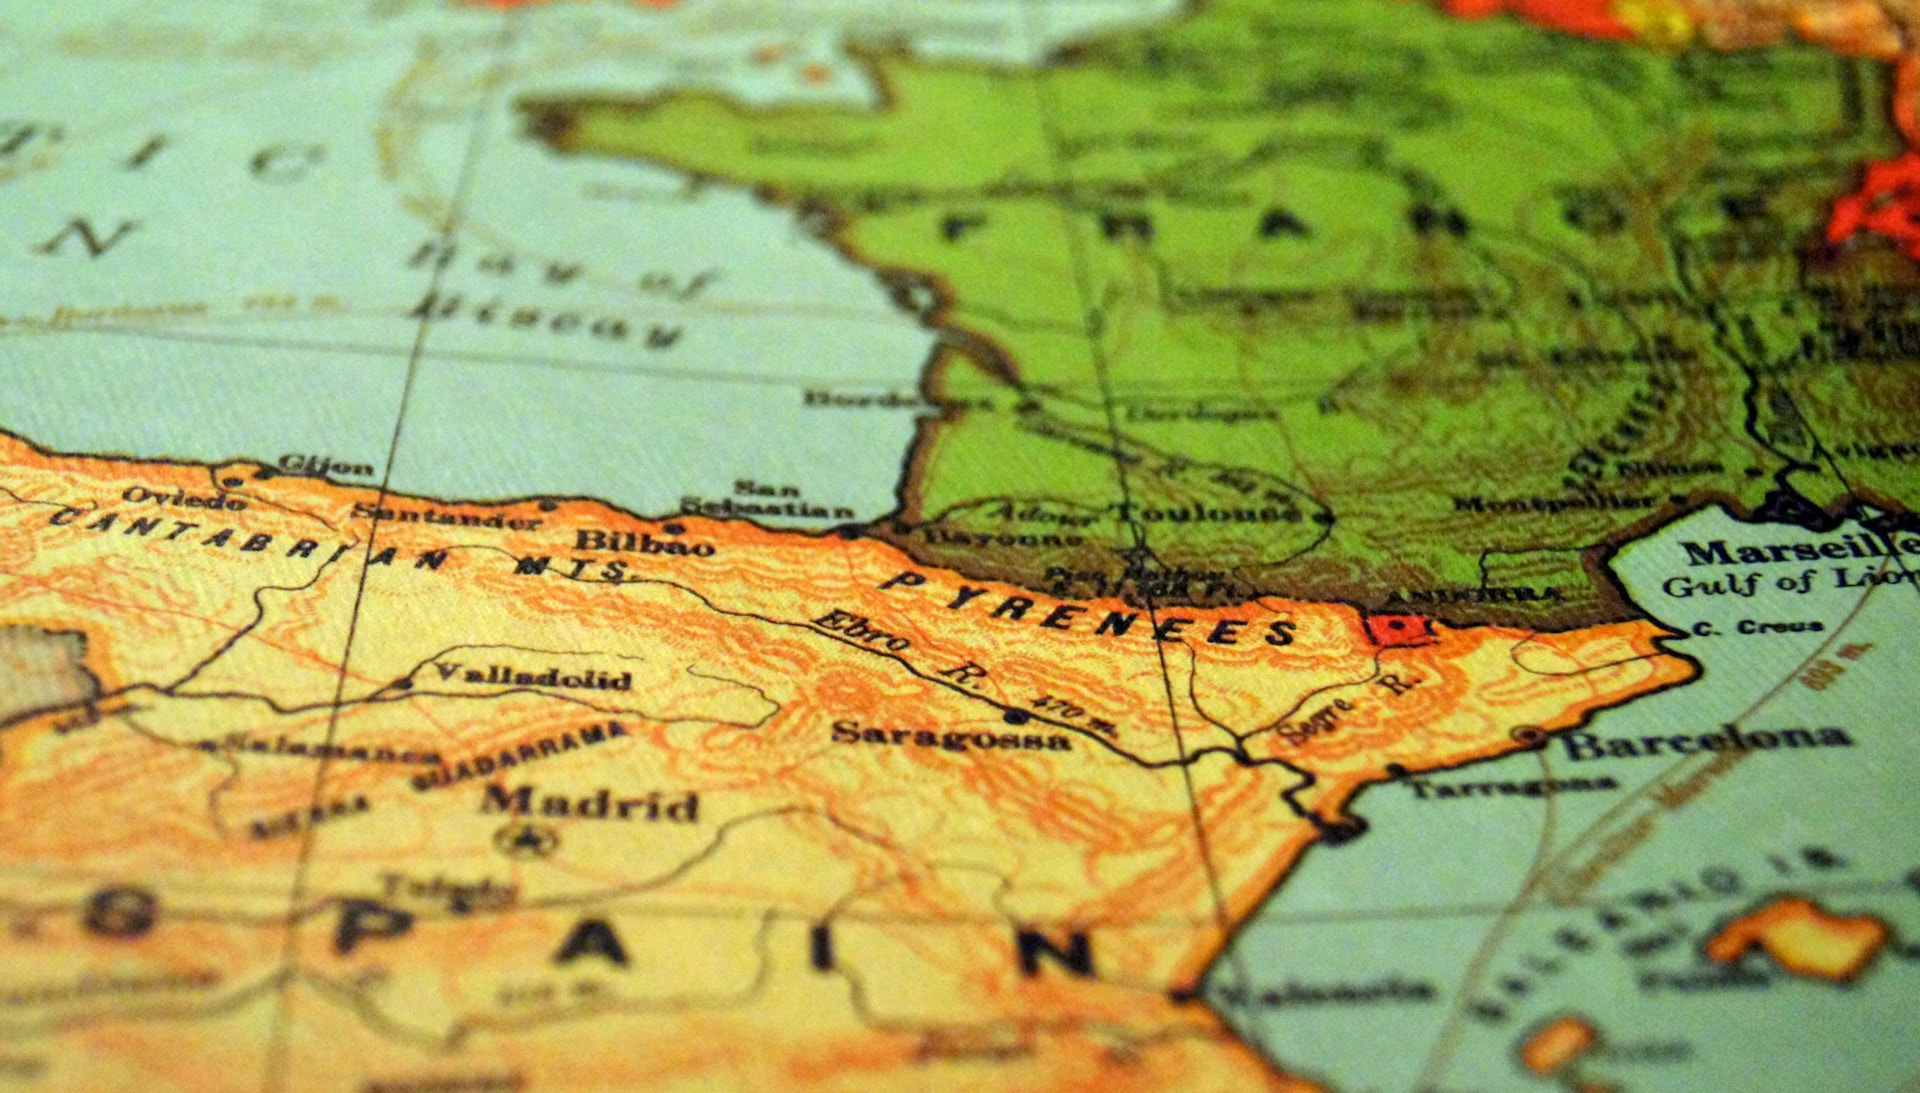 A close-up photo of a globe, focusing on Spain and Portugal.